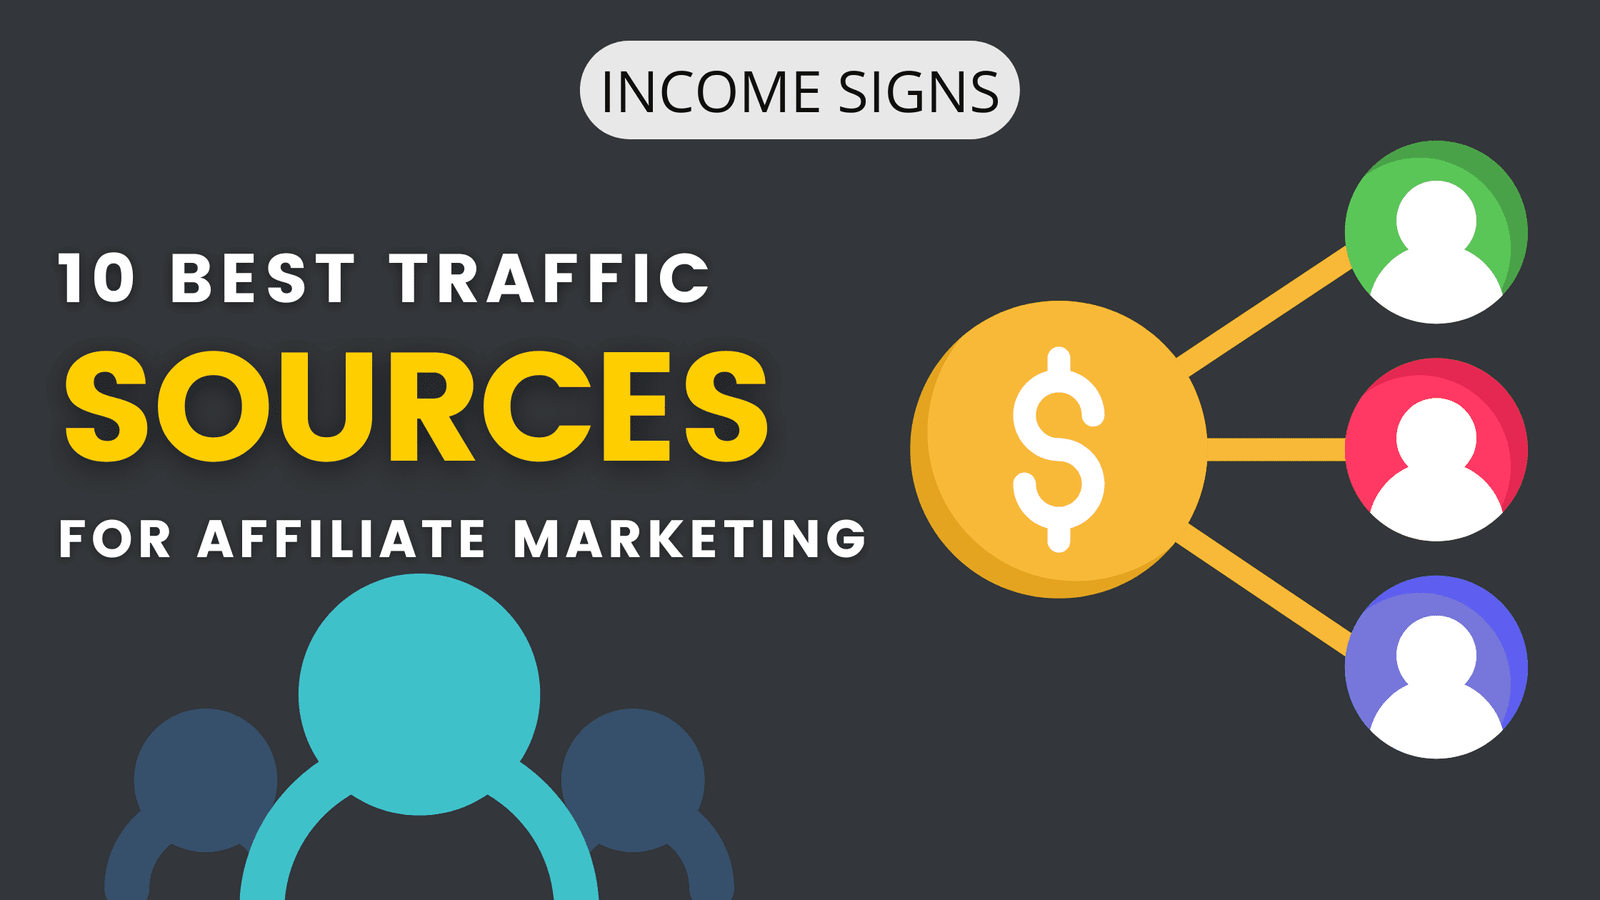 10 Best Traffic Sources For Affiliate Marketing